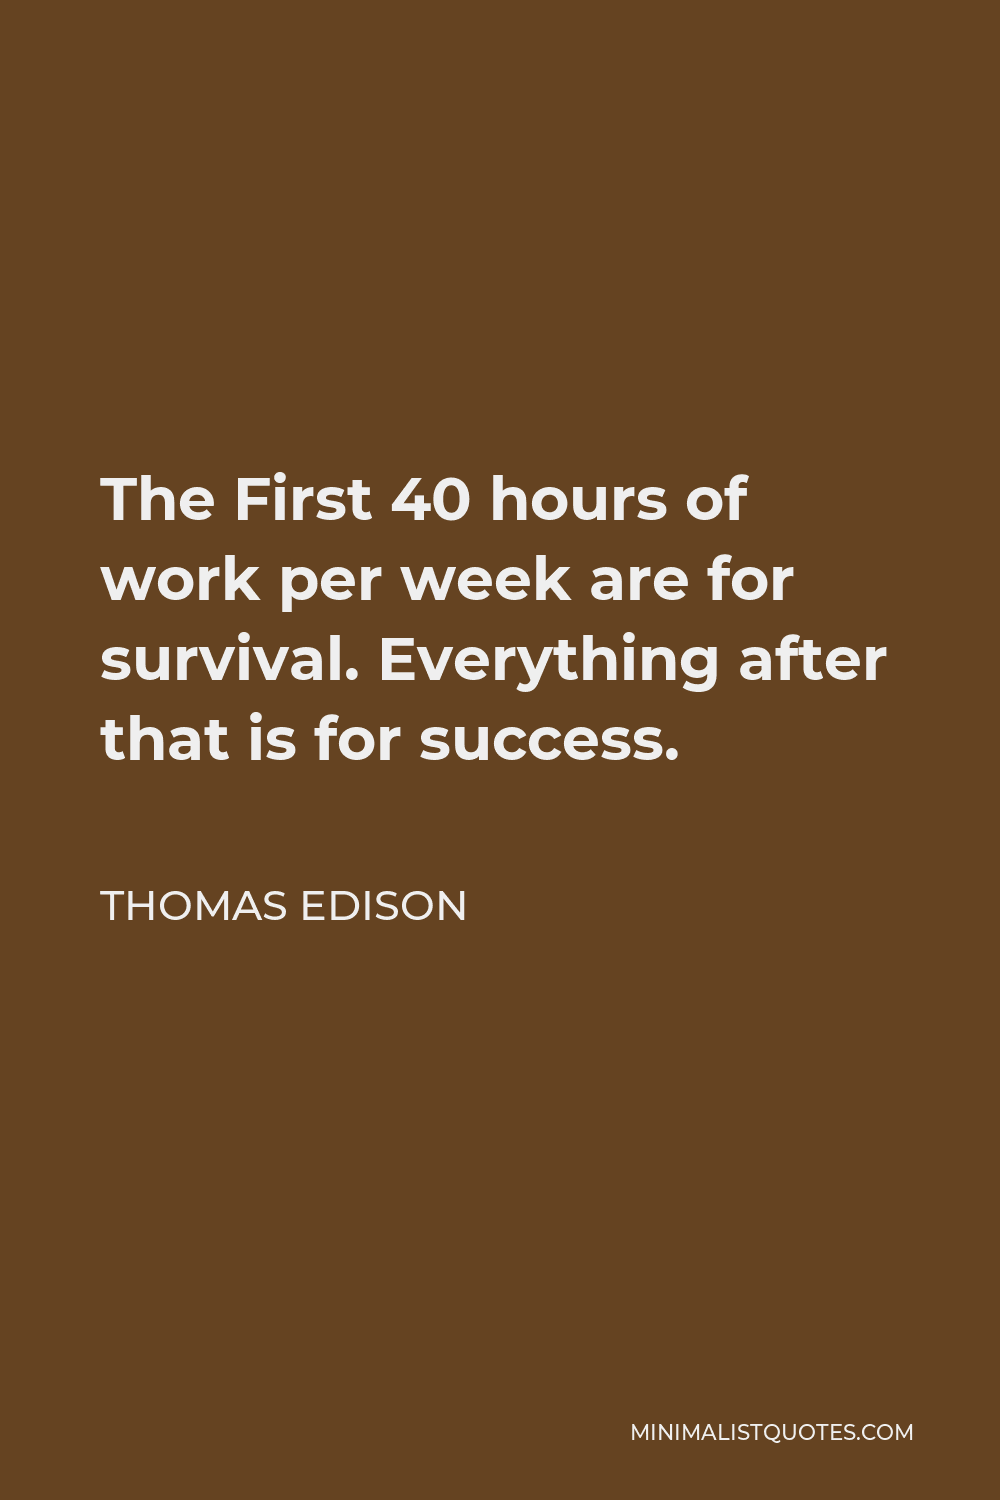 Thomas Edison Quote - The First 40 hours of work per week are for survival. Everything after that is for success.